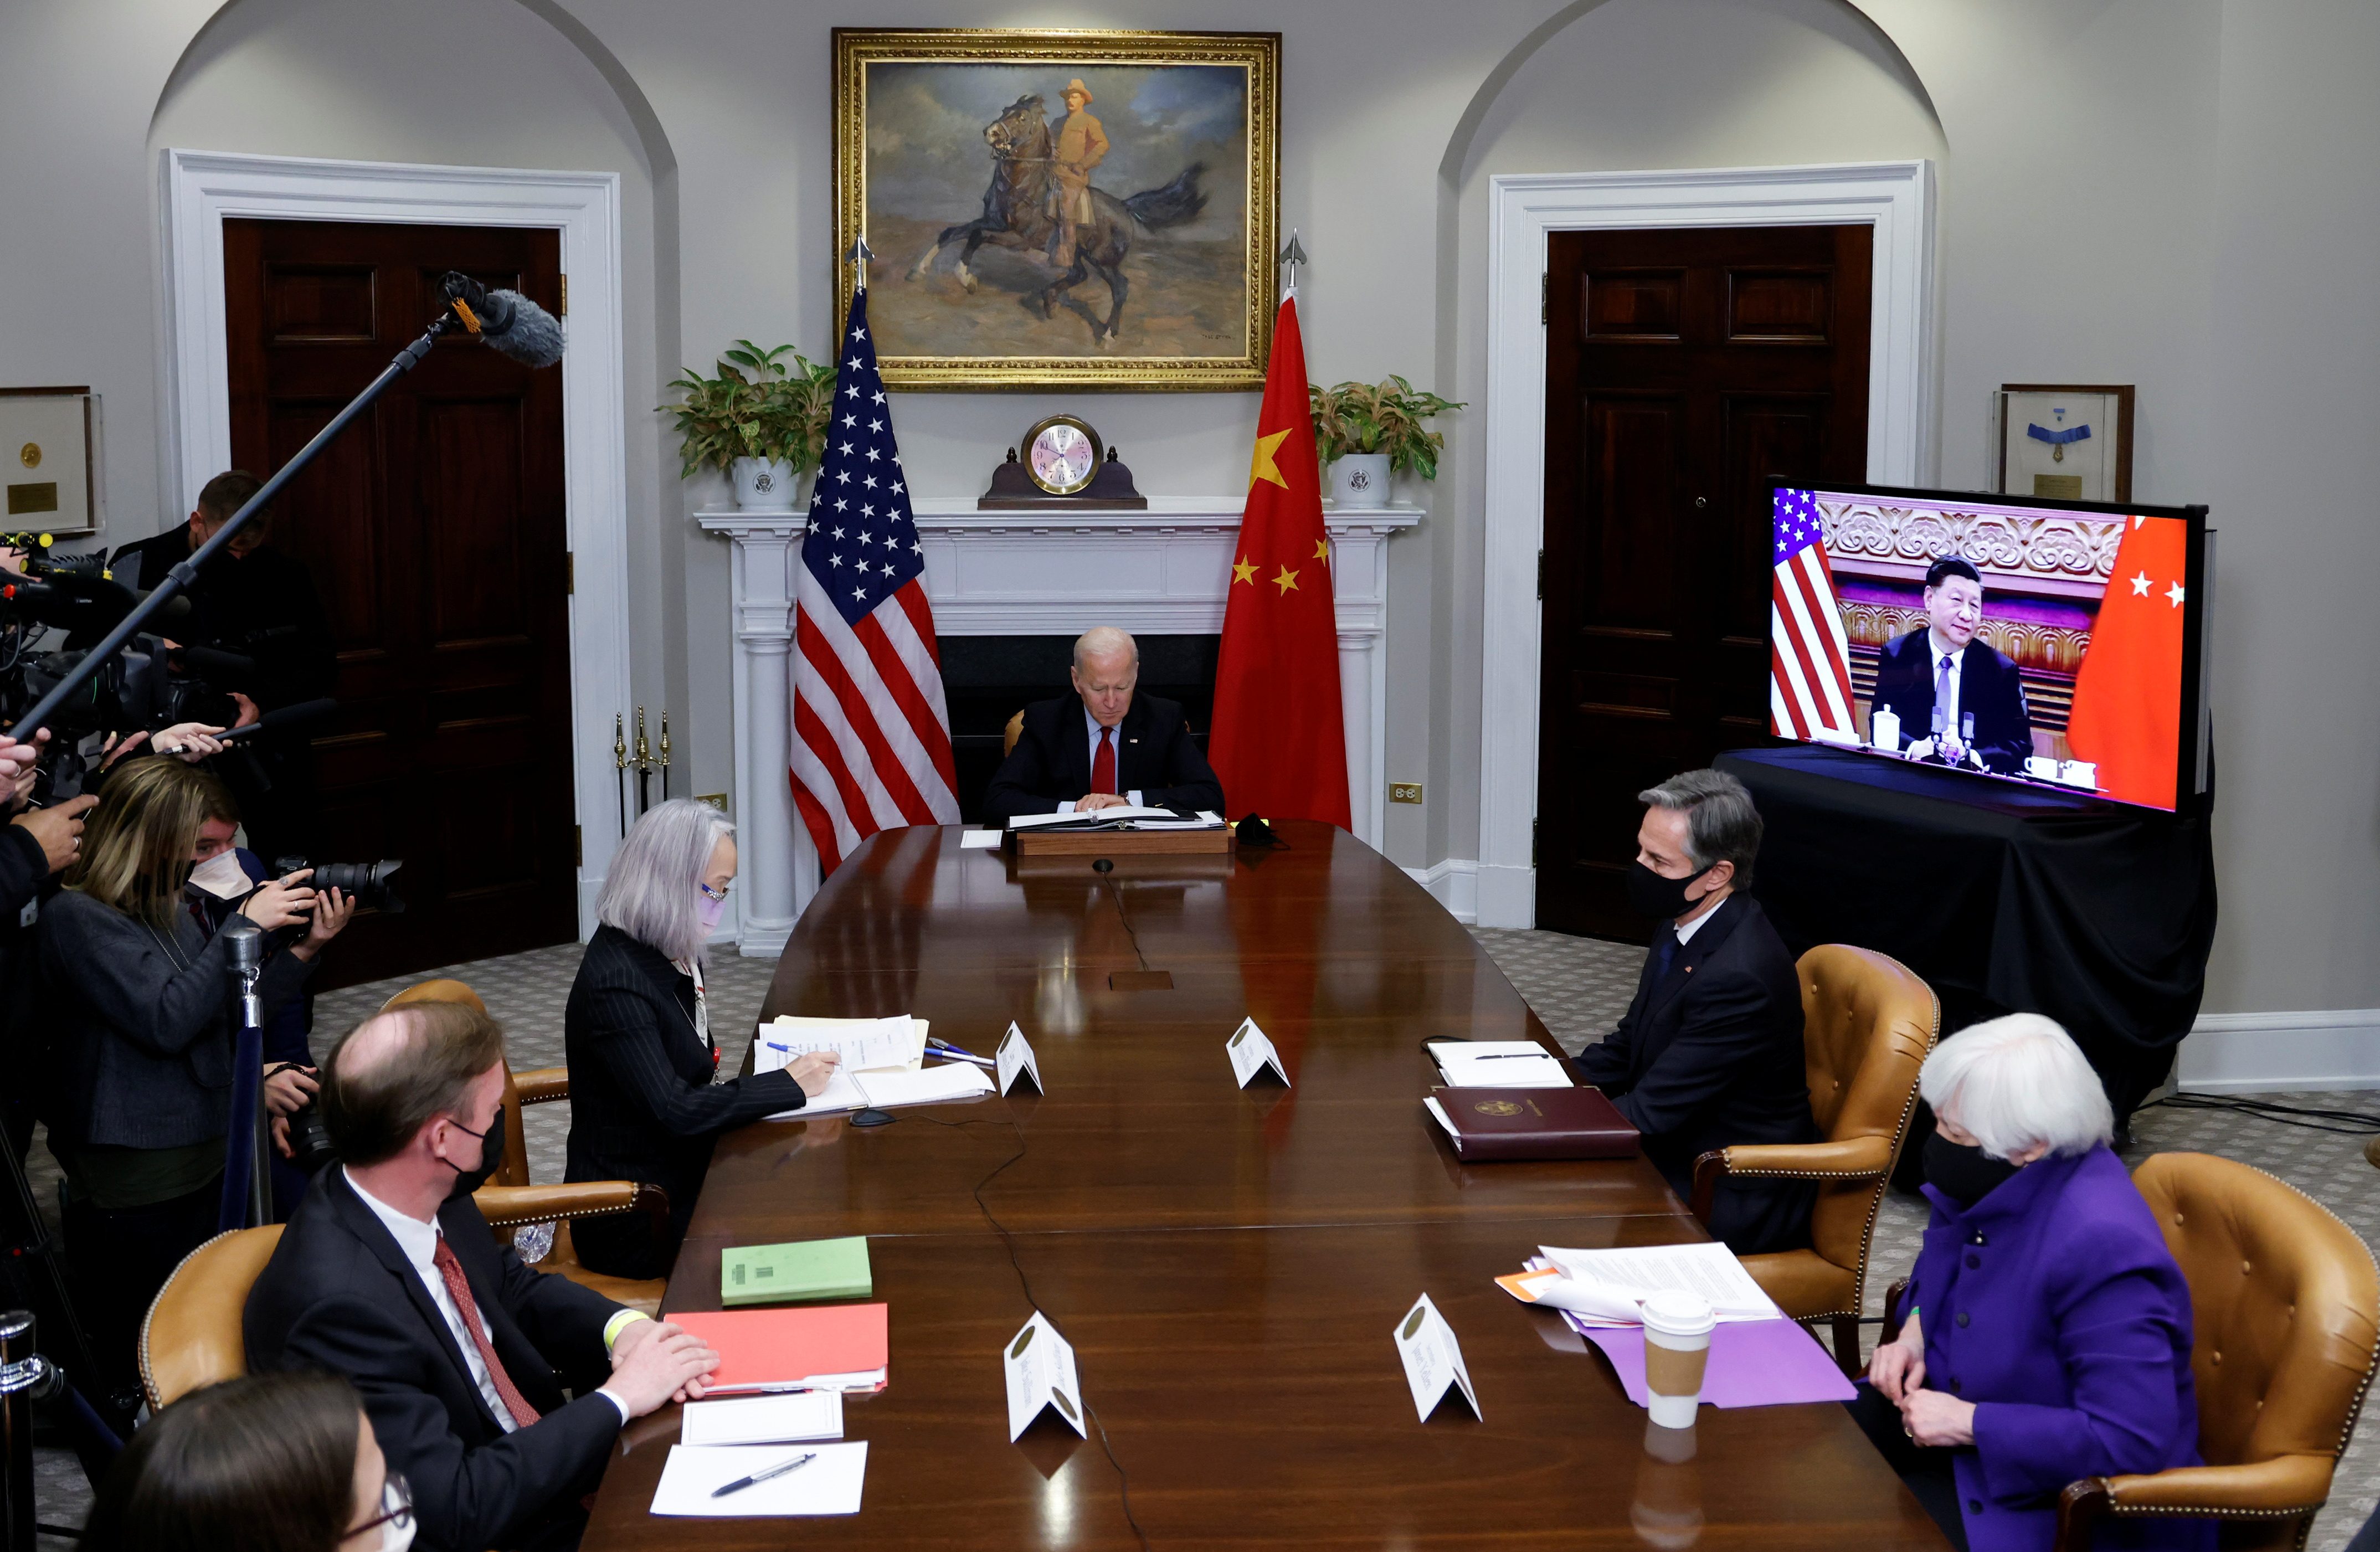 Biden promises candor on human rights, Xi greets ‘old friend’ as US-China talks begin